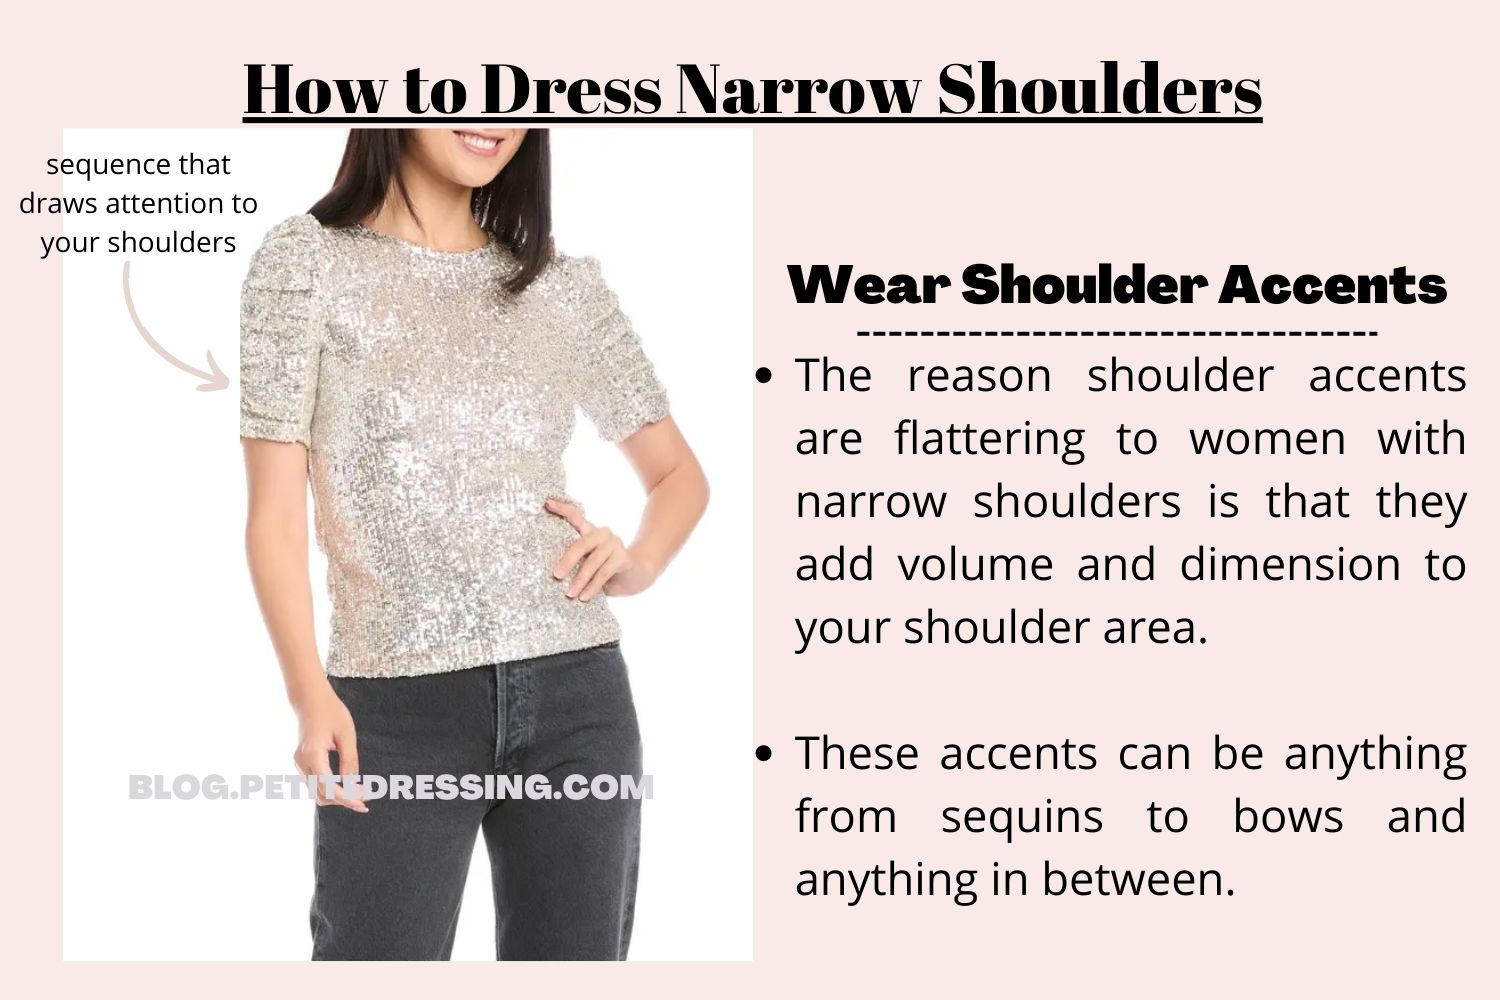 The Comprehensive Styling Guide for Narrow Shoulders - Petite Dressing